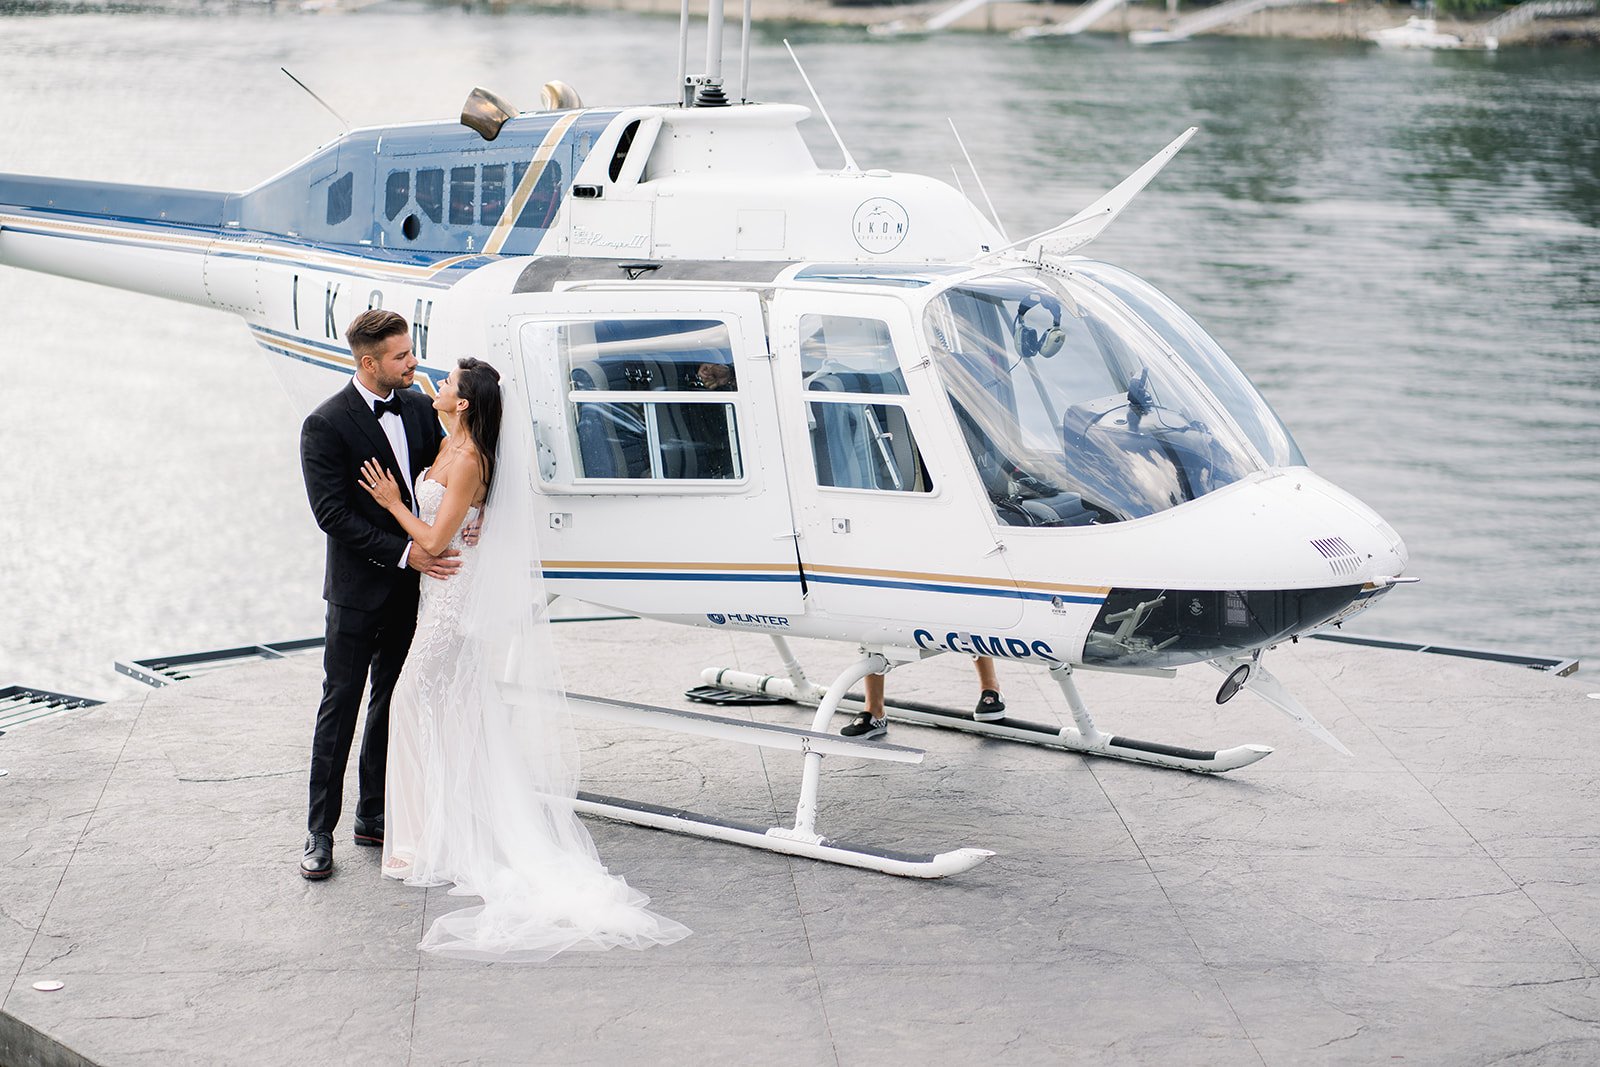 Wealthy Vancouver couple gazes into each other eyes before literally and metaphorically rising above rest of local Vancouver population in helicopter. 